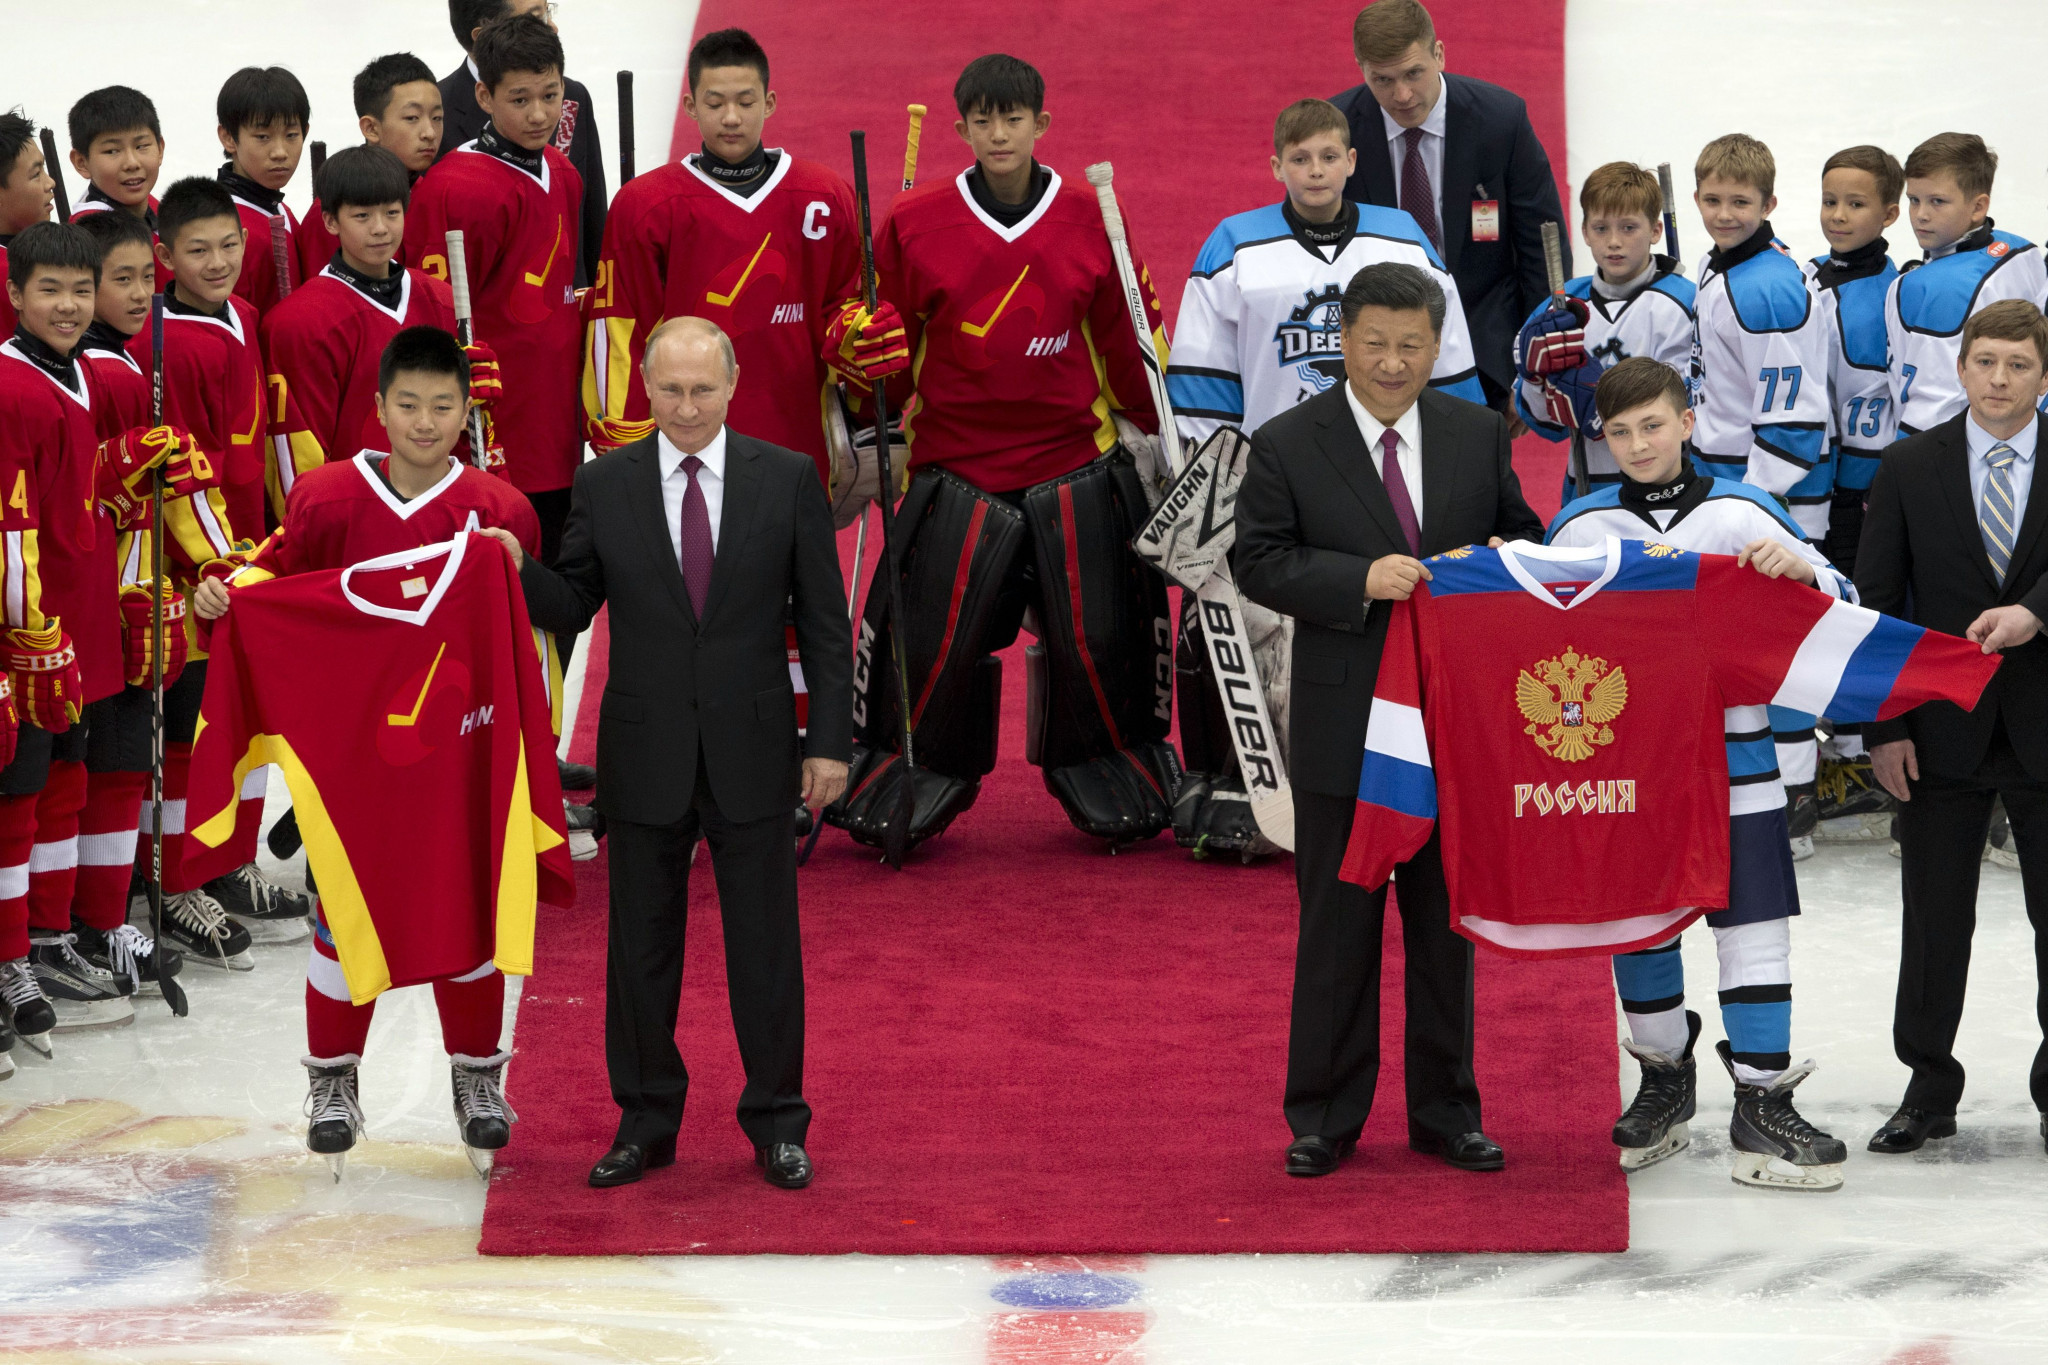 Vladimir Putin and Xi Jinping were among the 7,000-plus spectators that attended a recent youth team ice hockey match between China and Russia ©Getty Images